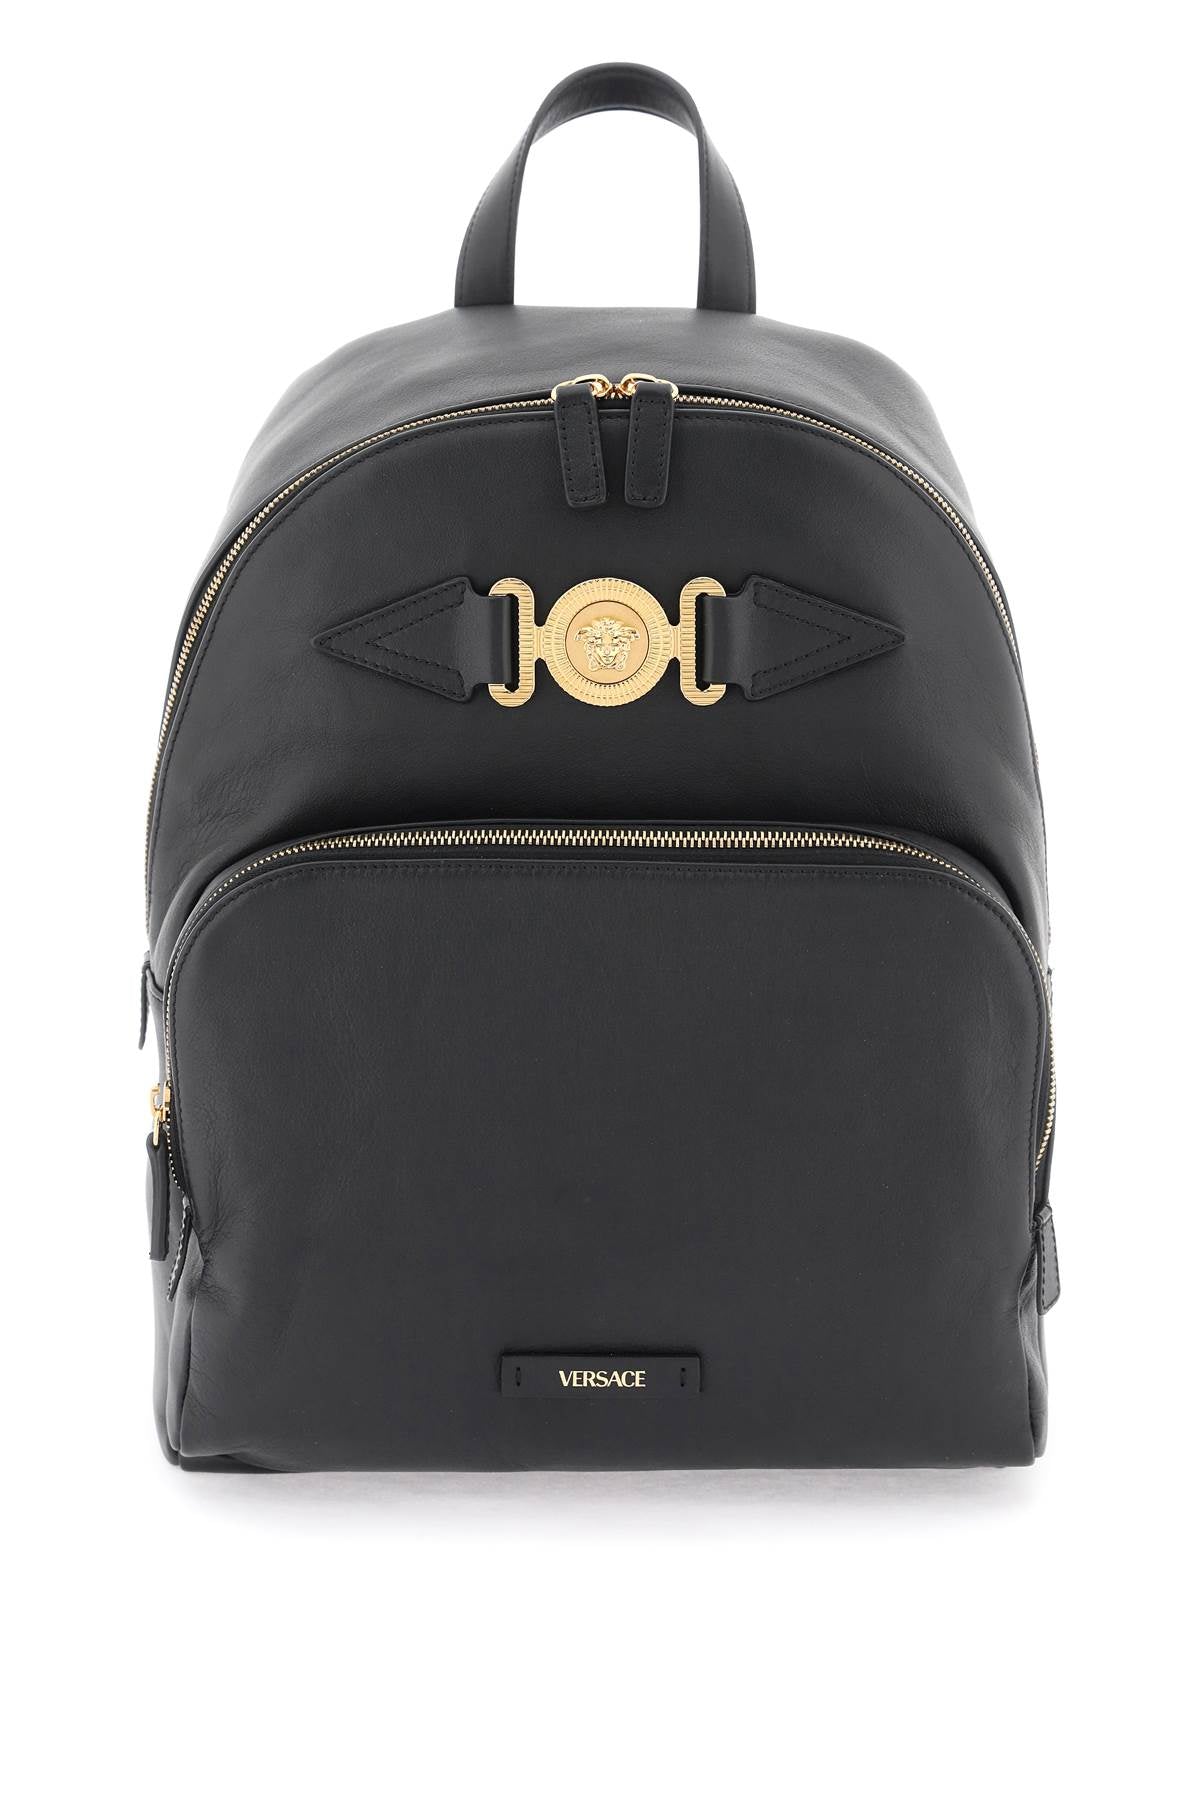 VERSACE Luxurious Men's Leather Backpack with Iconic Medusa Applique